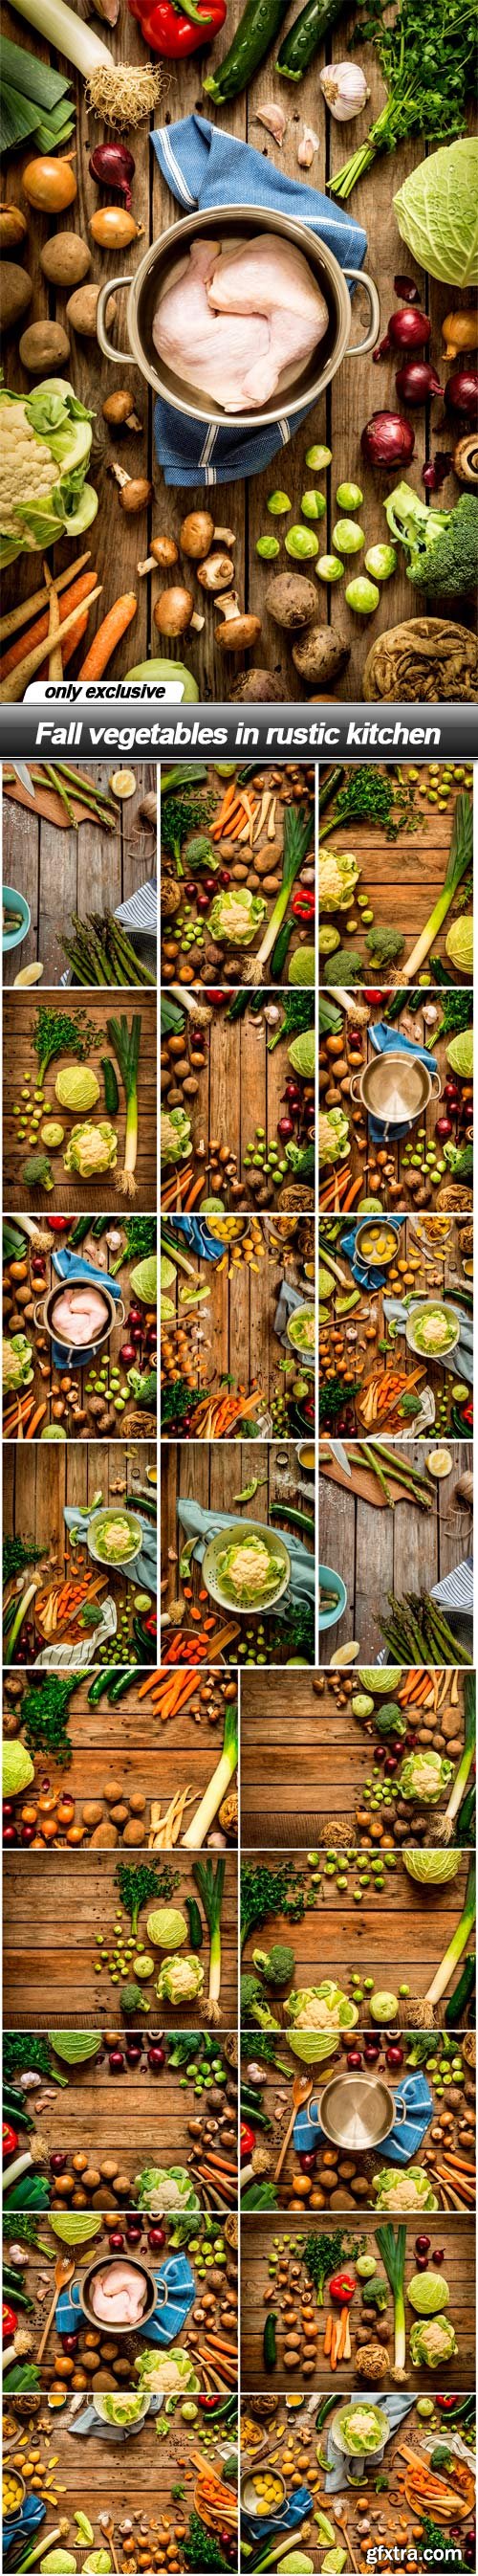 Fall vegetables in rustic kitchen - 21 UHQ JPEG